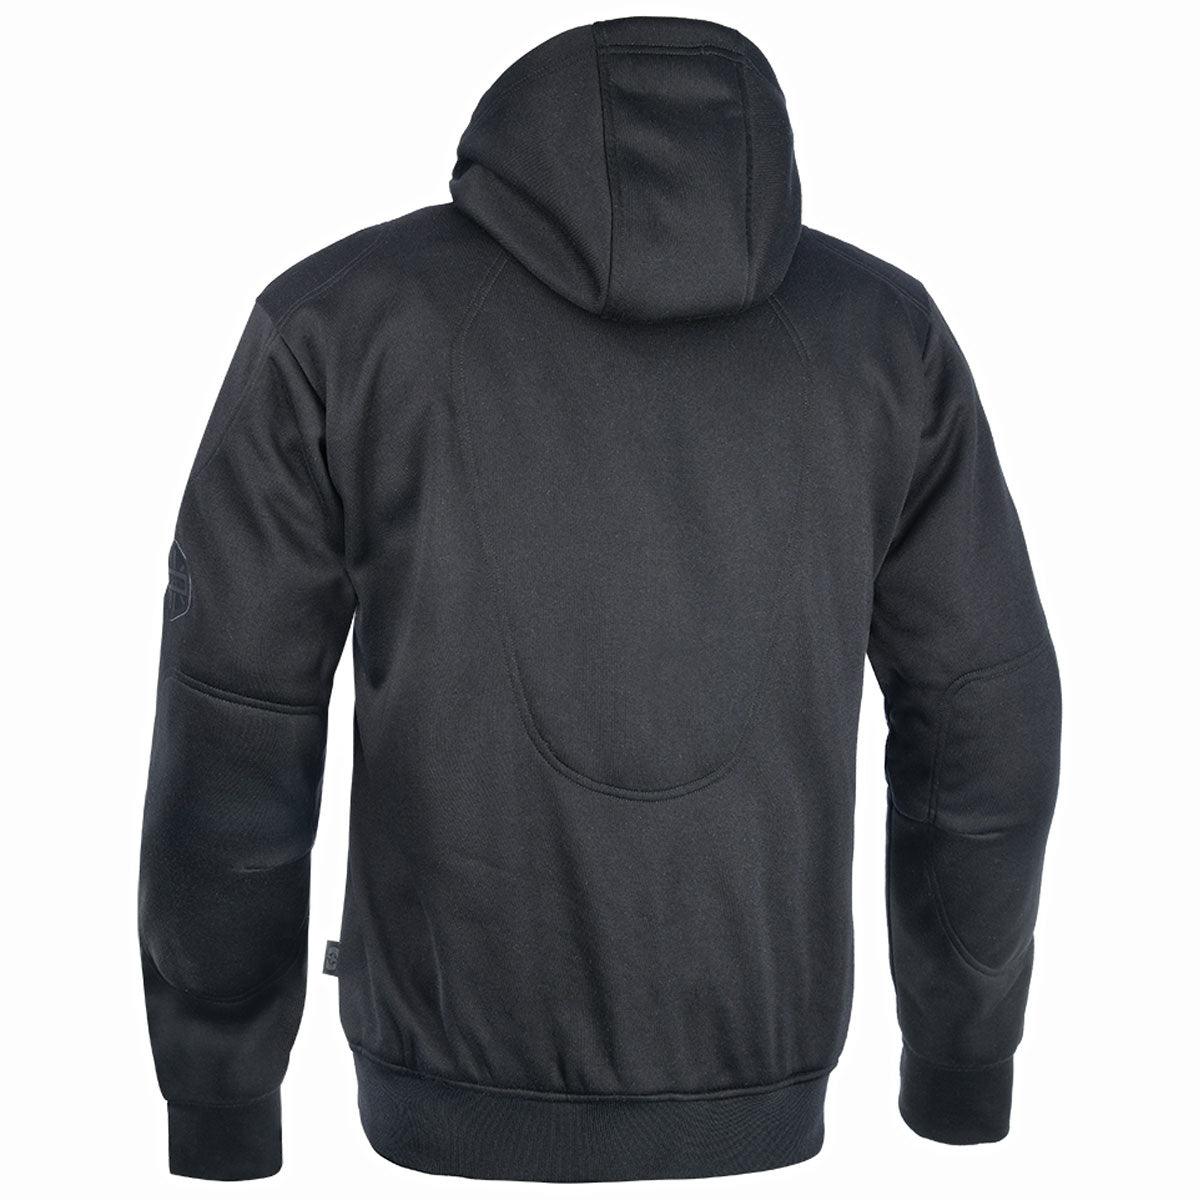 Oxford Super Hoodie 2.0 - Tech Black - Browse our range of Clothing: Hoodies - getgearedshop 